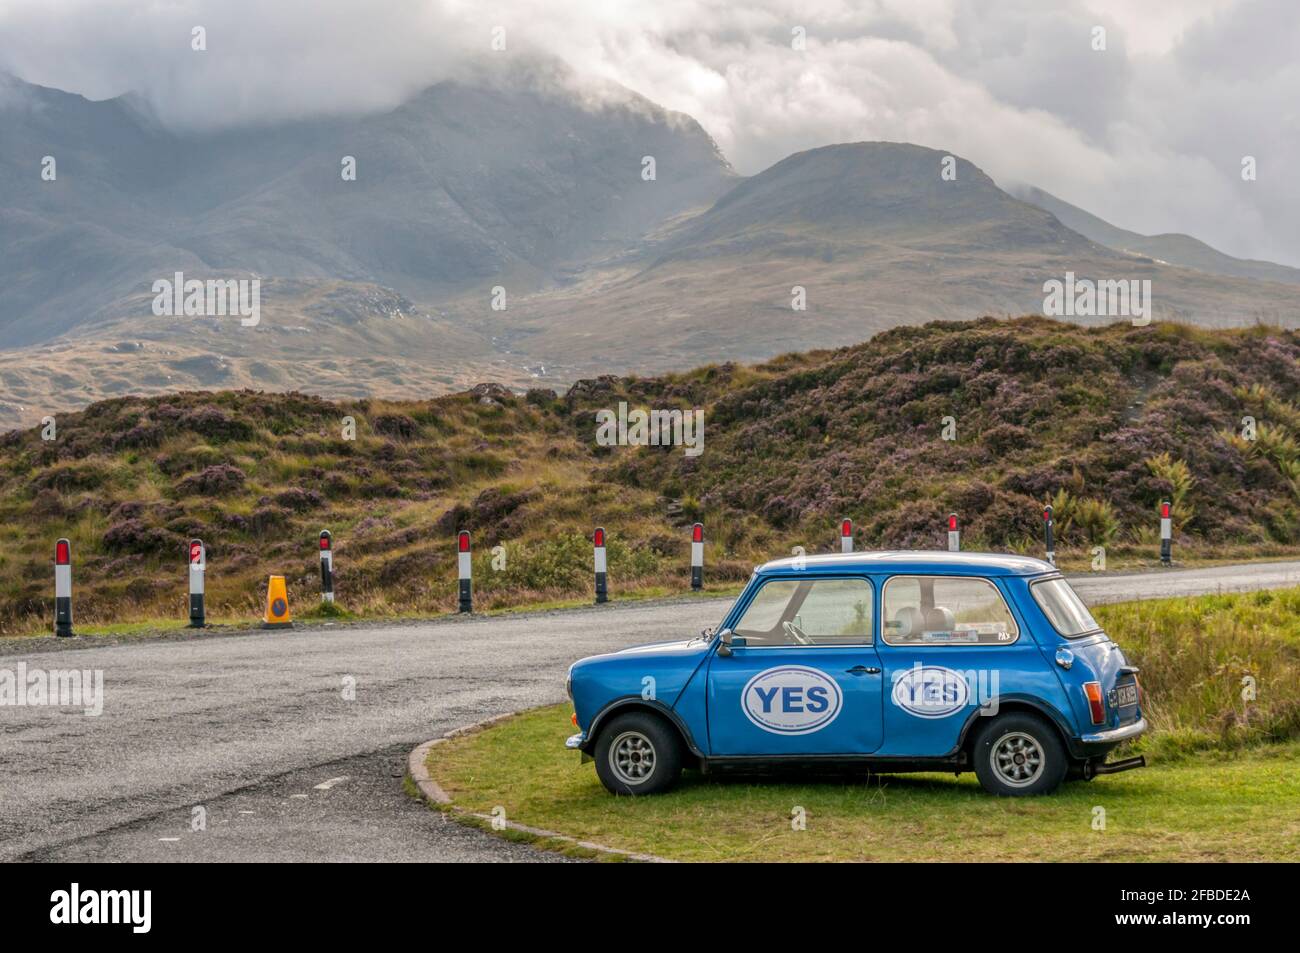 A mini car on the Isle of Skye promoting a Yes vote in the 2014 Scottish independence referendum Stock Photo